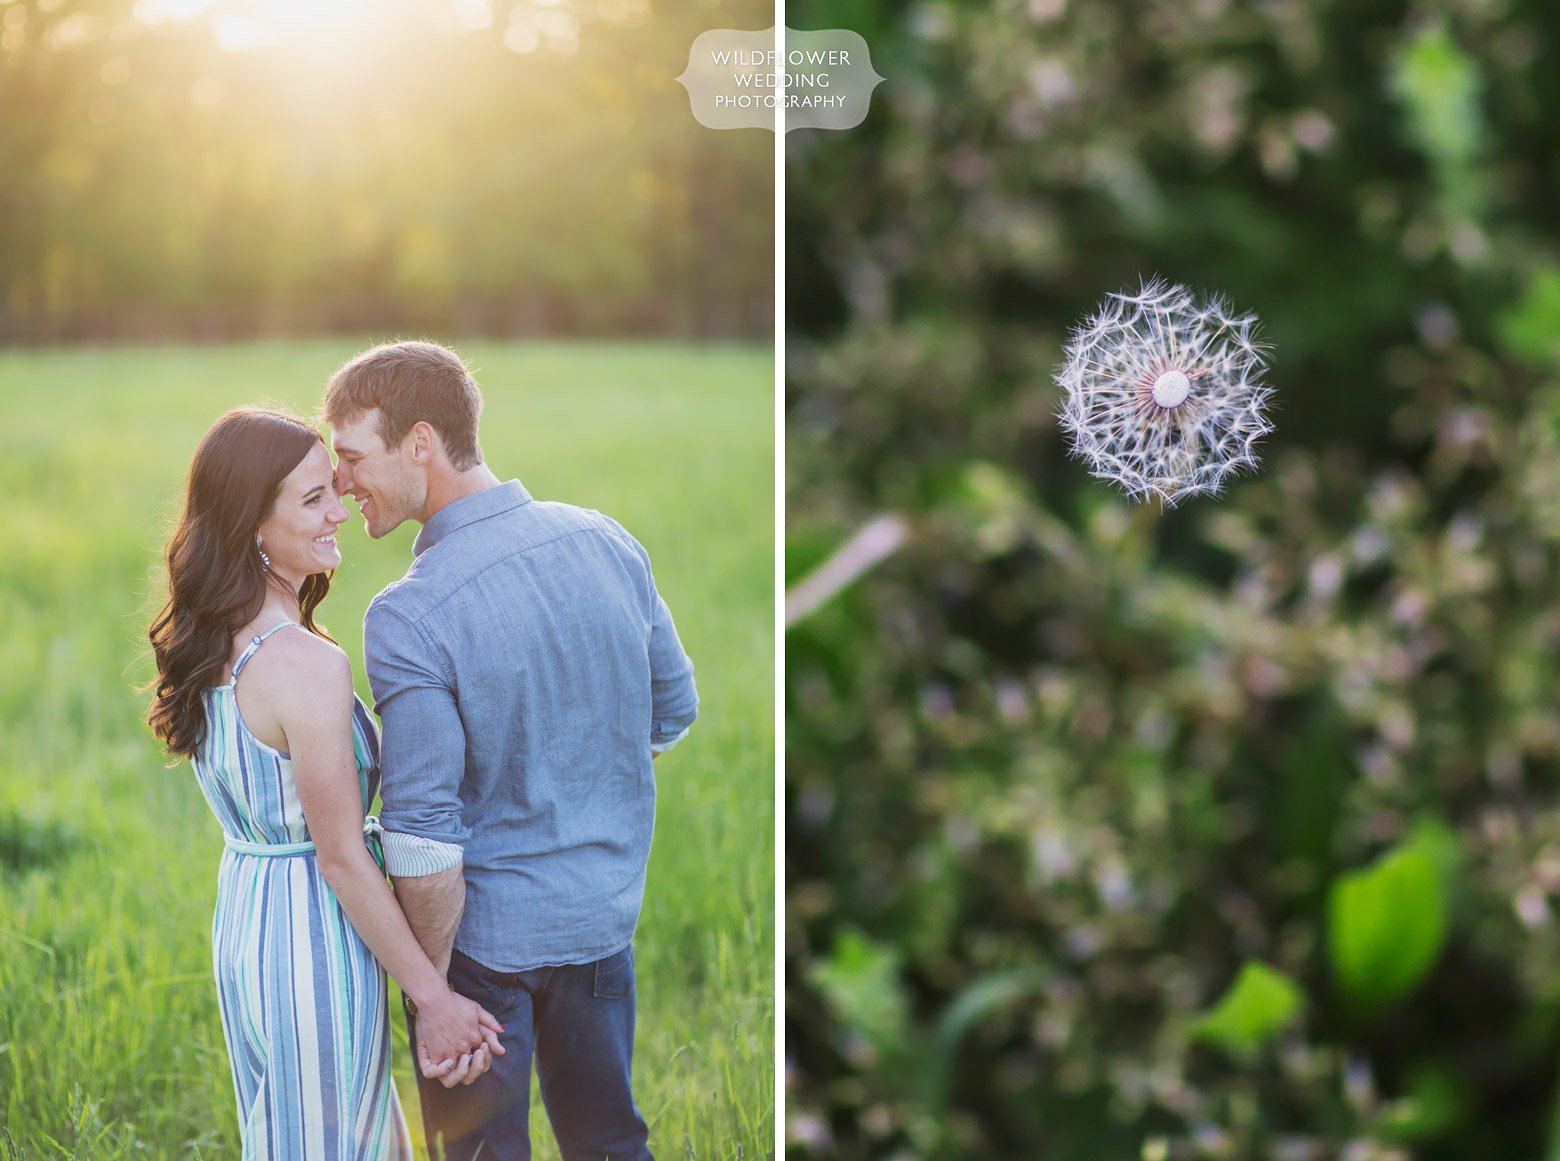 The most flattering pose for an engagement session in the country in mid-MO.